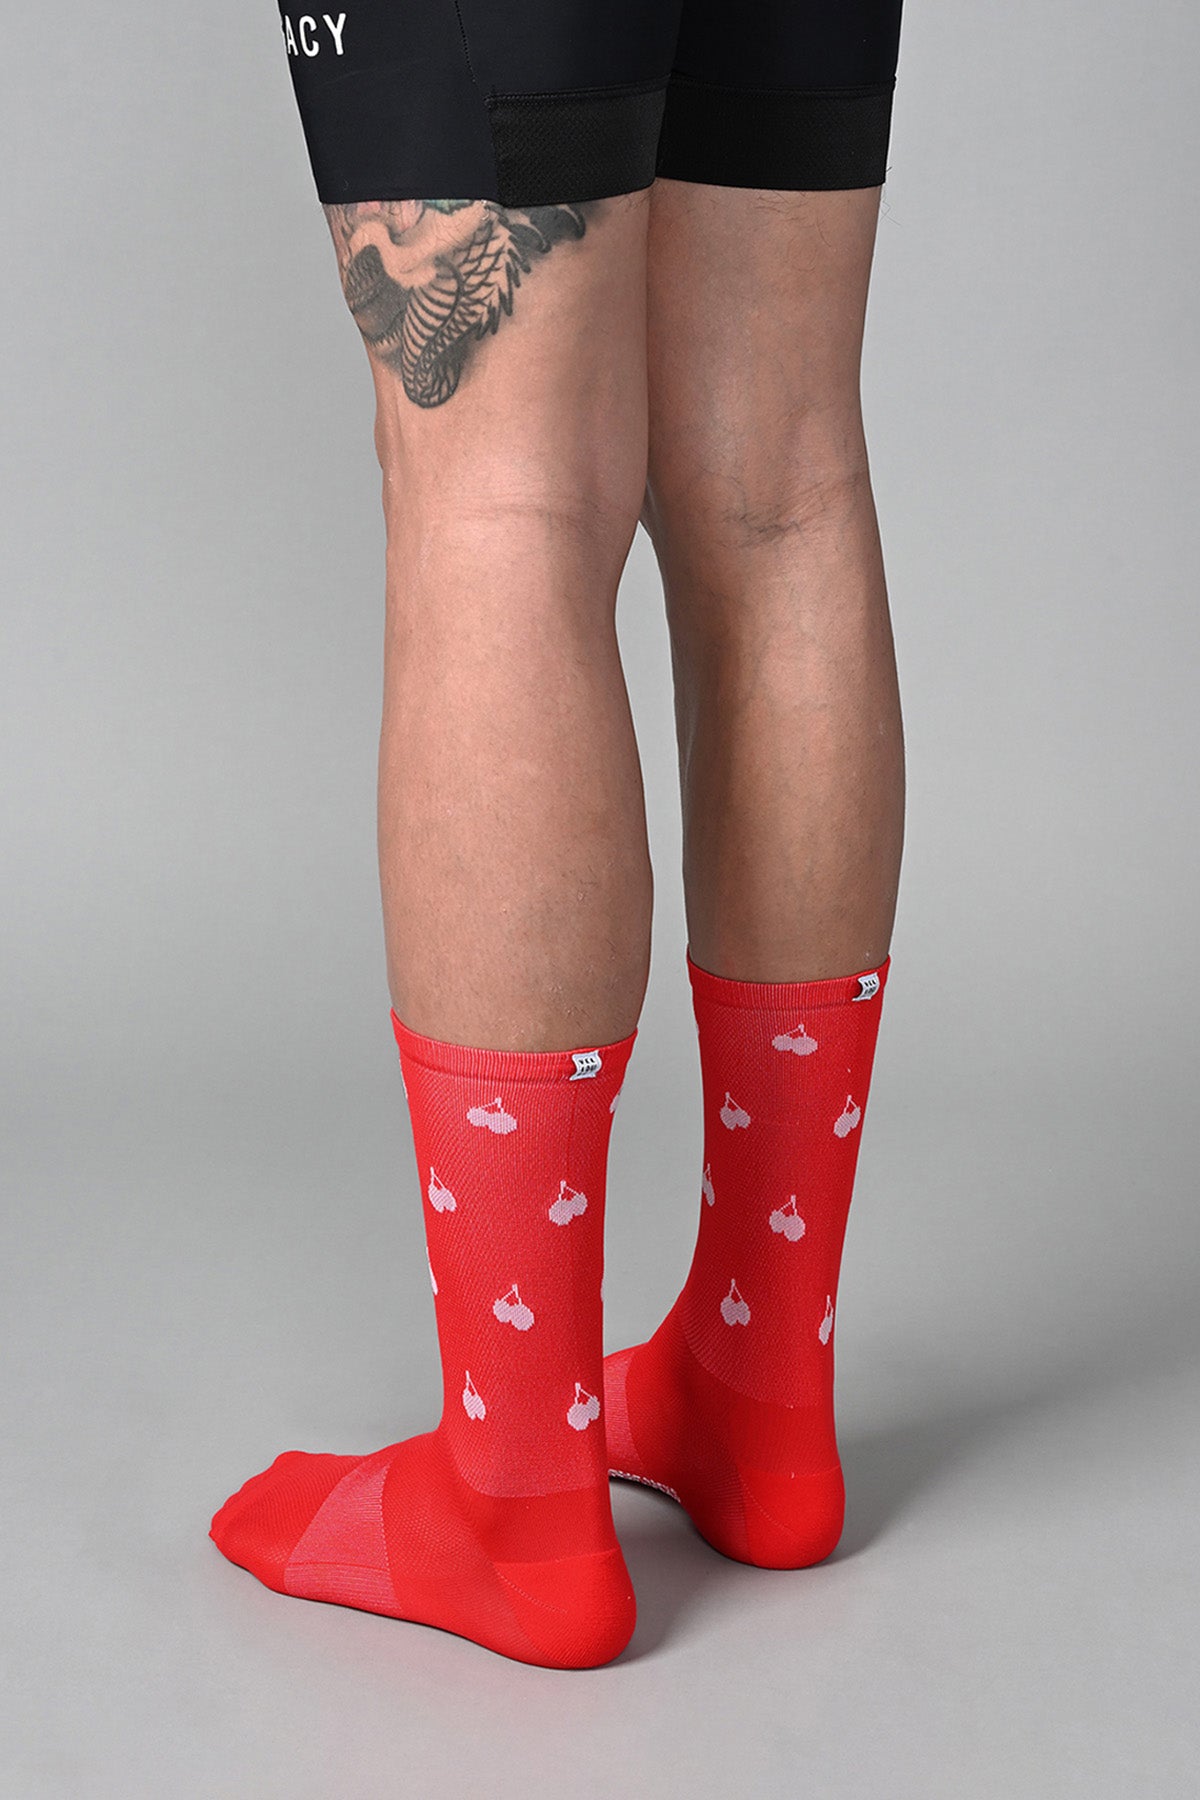 CHERRY - CANDY APPLE RED REAR SIDE | BEST CYCLING SOCKS